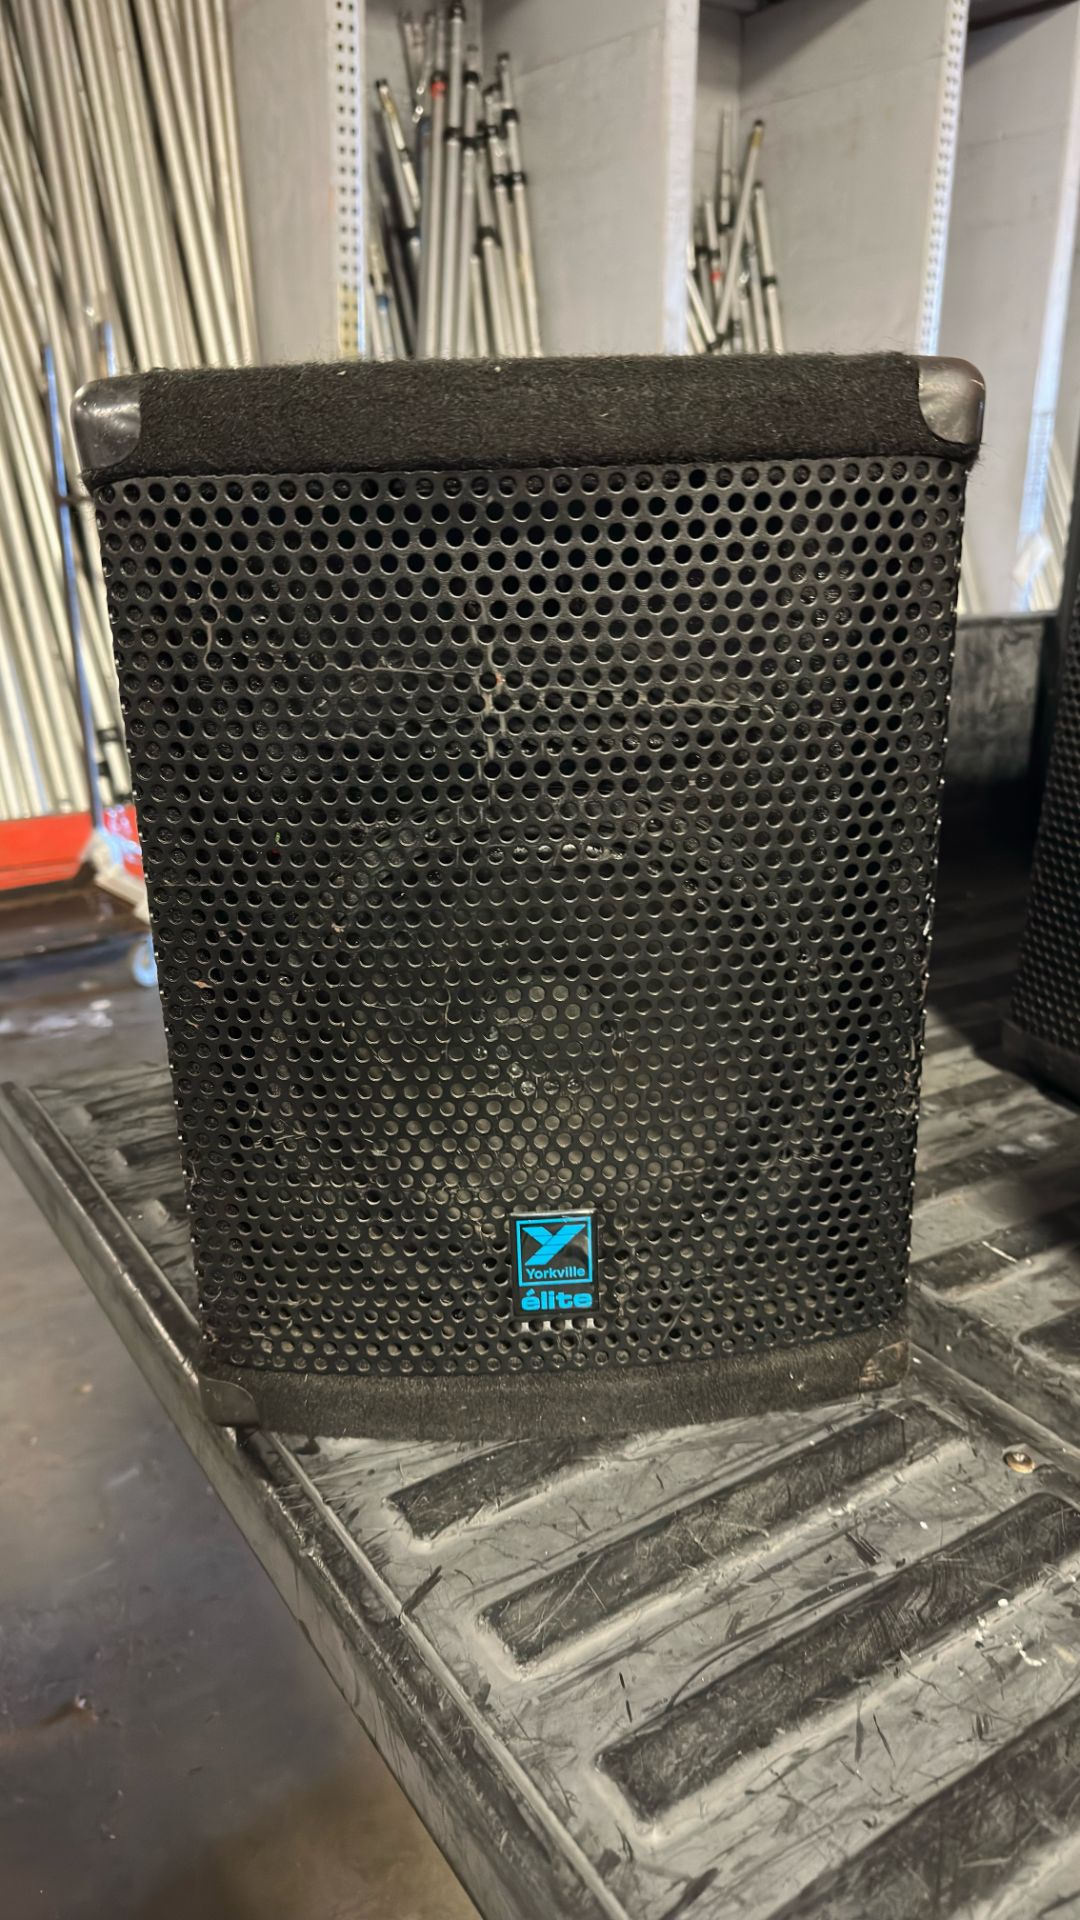 Yorkville E160P Loudspeaker with Amp/Mixer. One unit has intermittent issue